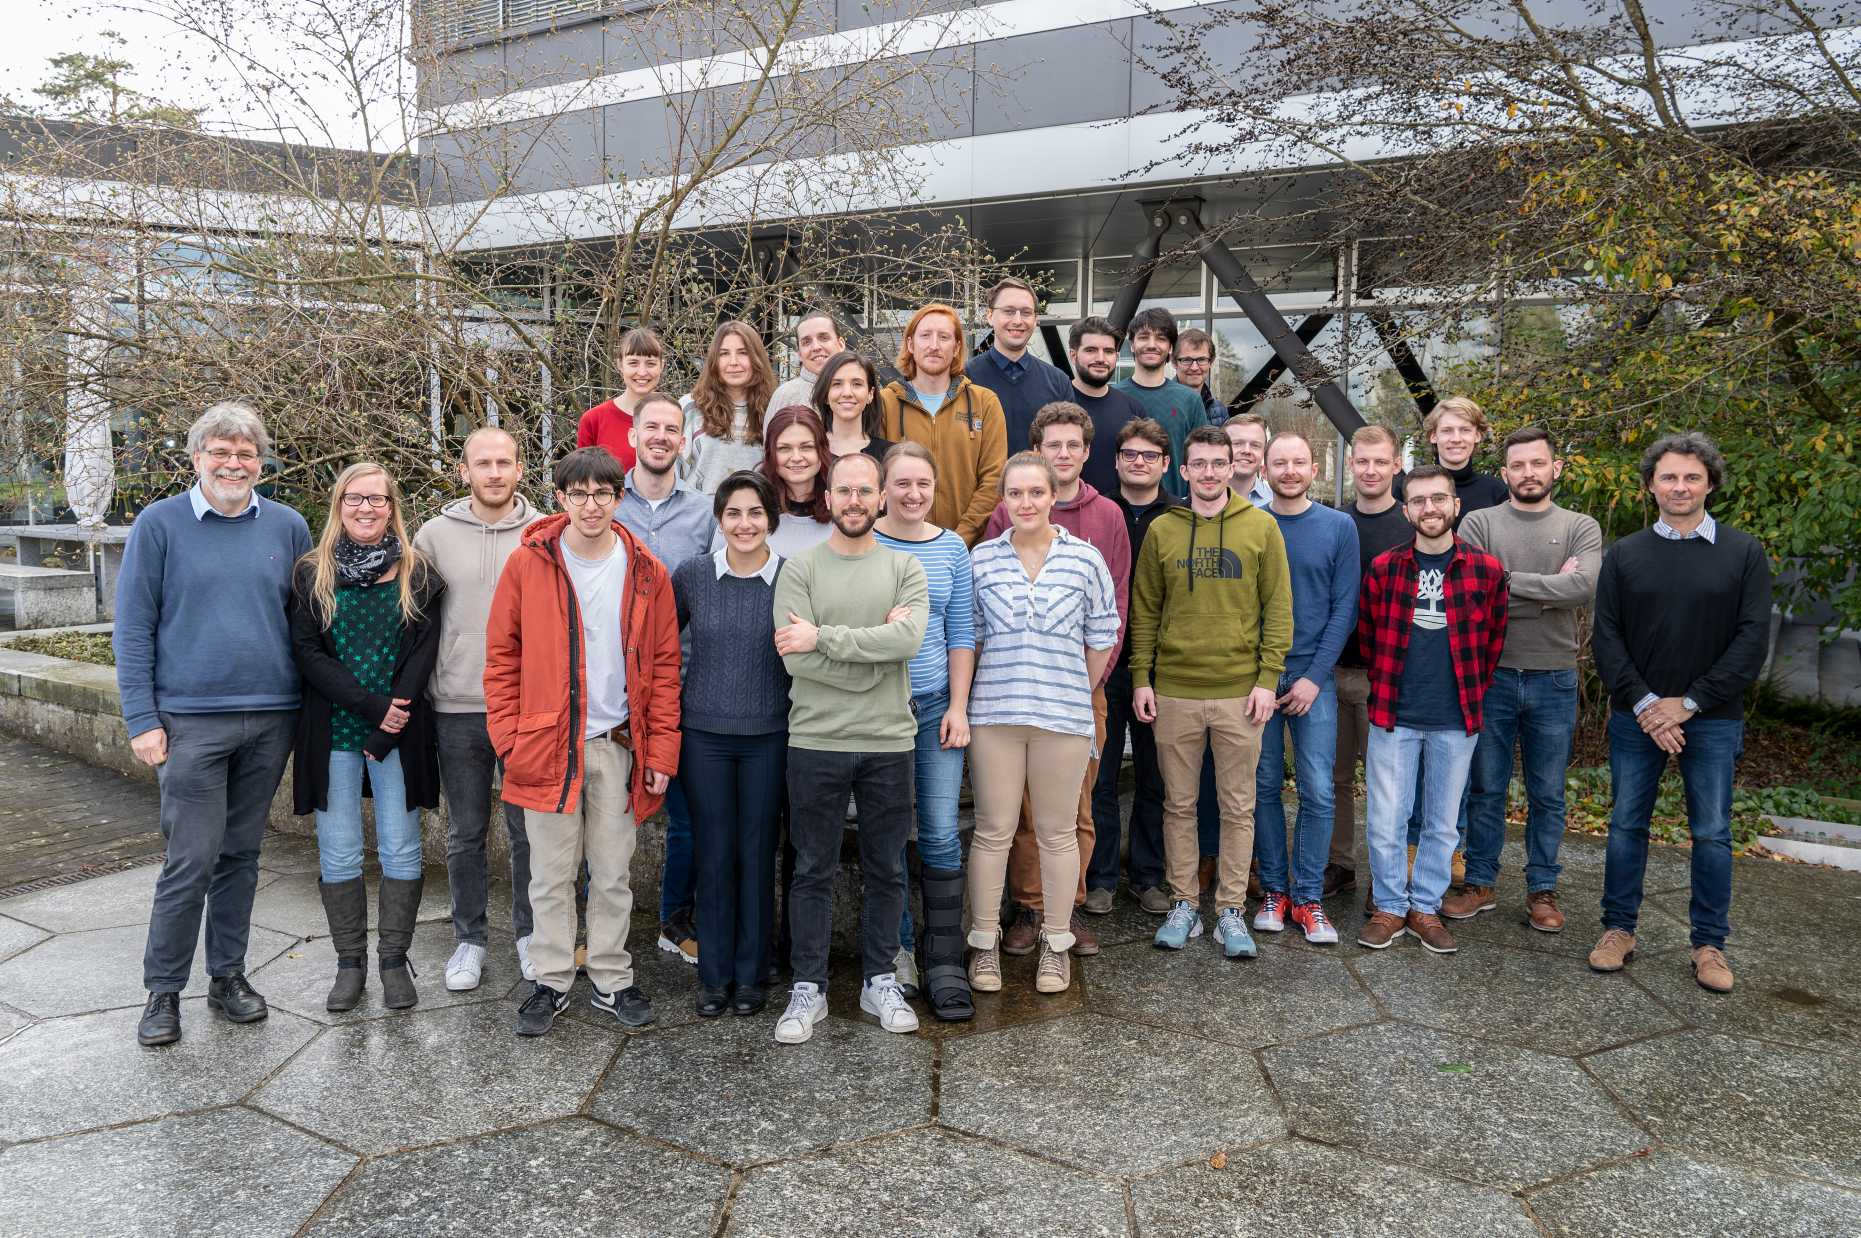 Enlarged view: Group picture February 2022 at ETH Zürich